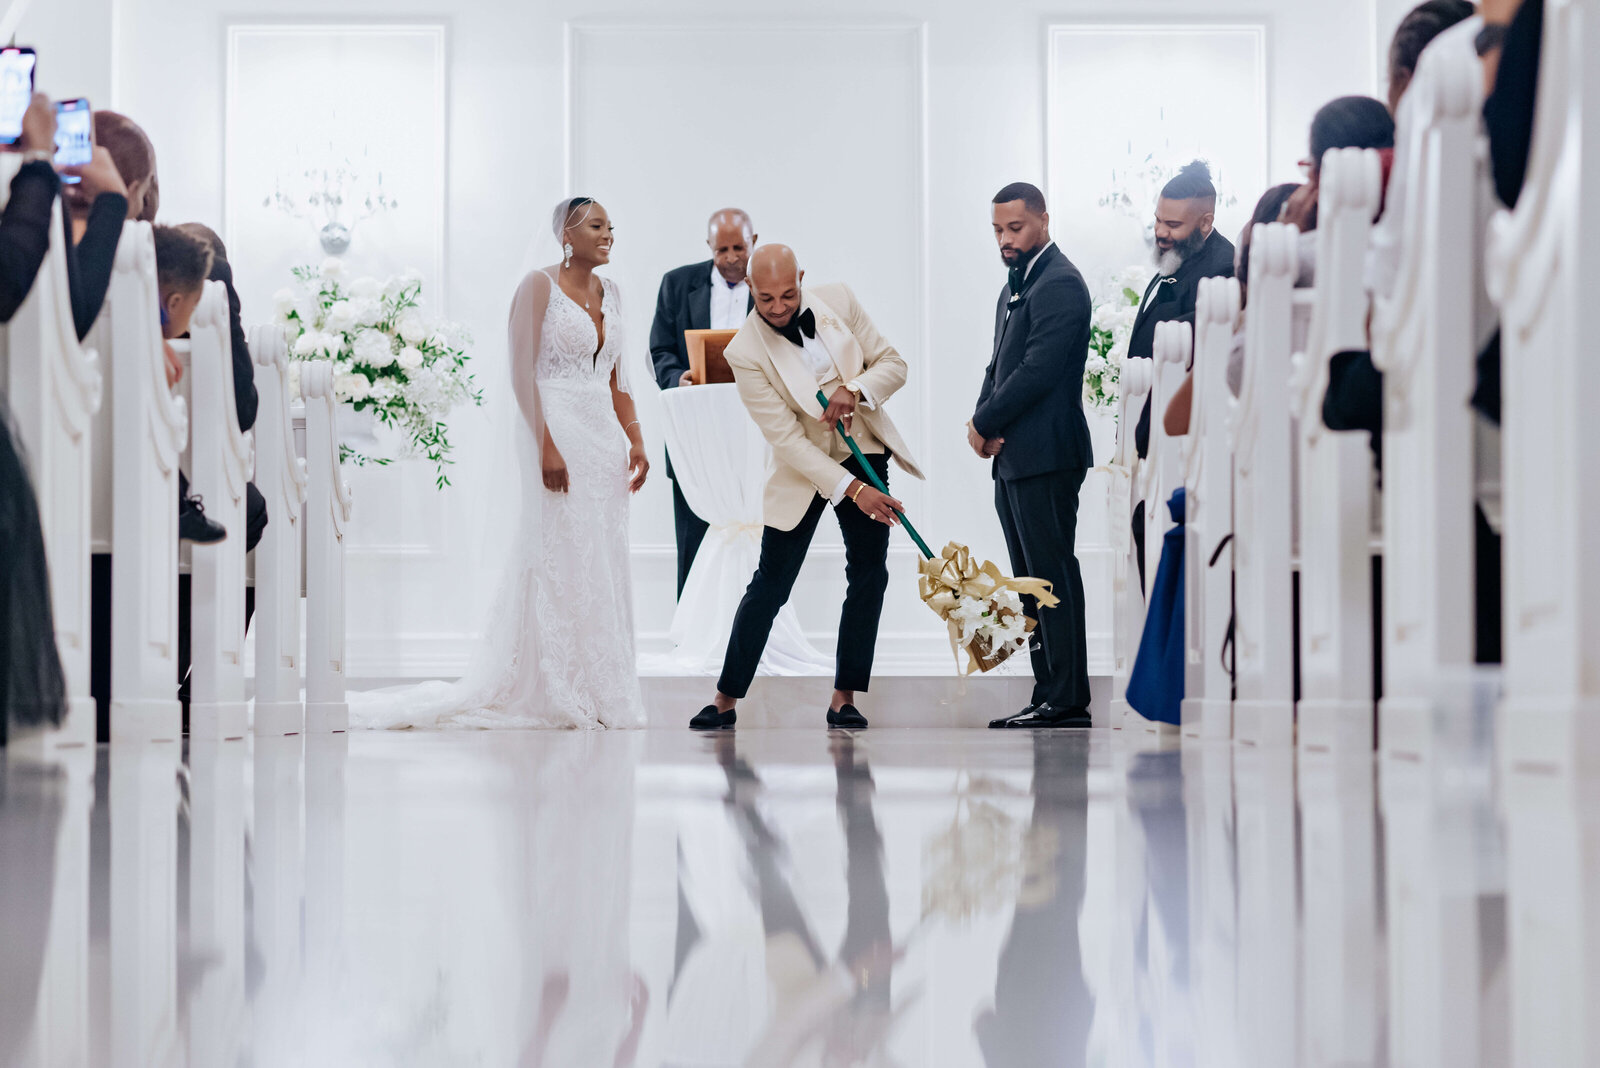 Couple jumping the broom